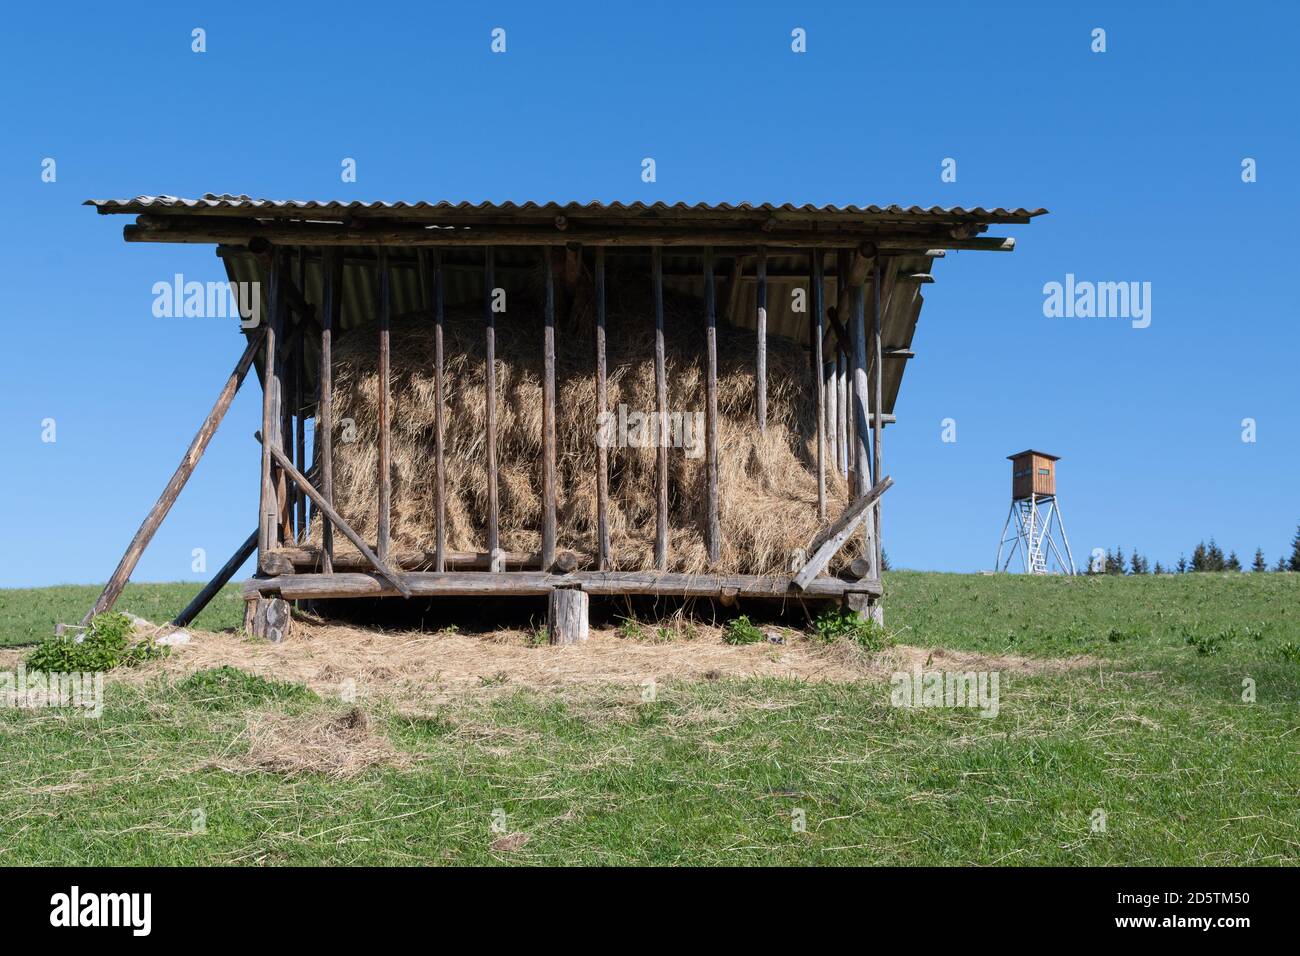 Deer trough feeder filled with hay and hunting hide in background. Hunting, big game hunting, animal feeding and agriculture concepts Stock Photo